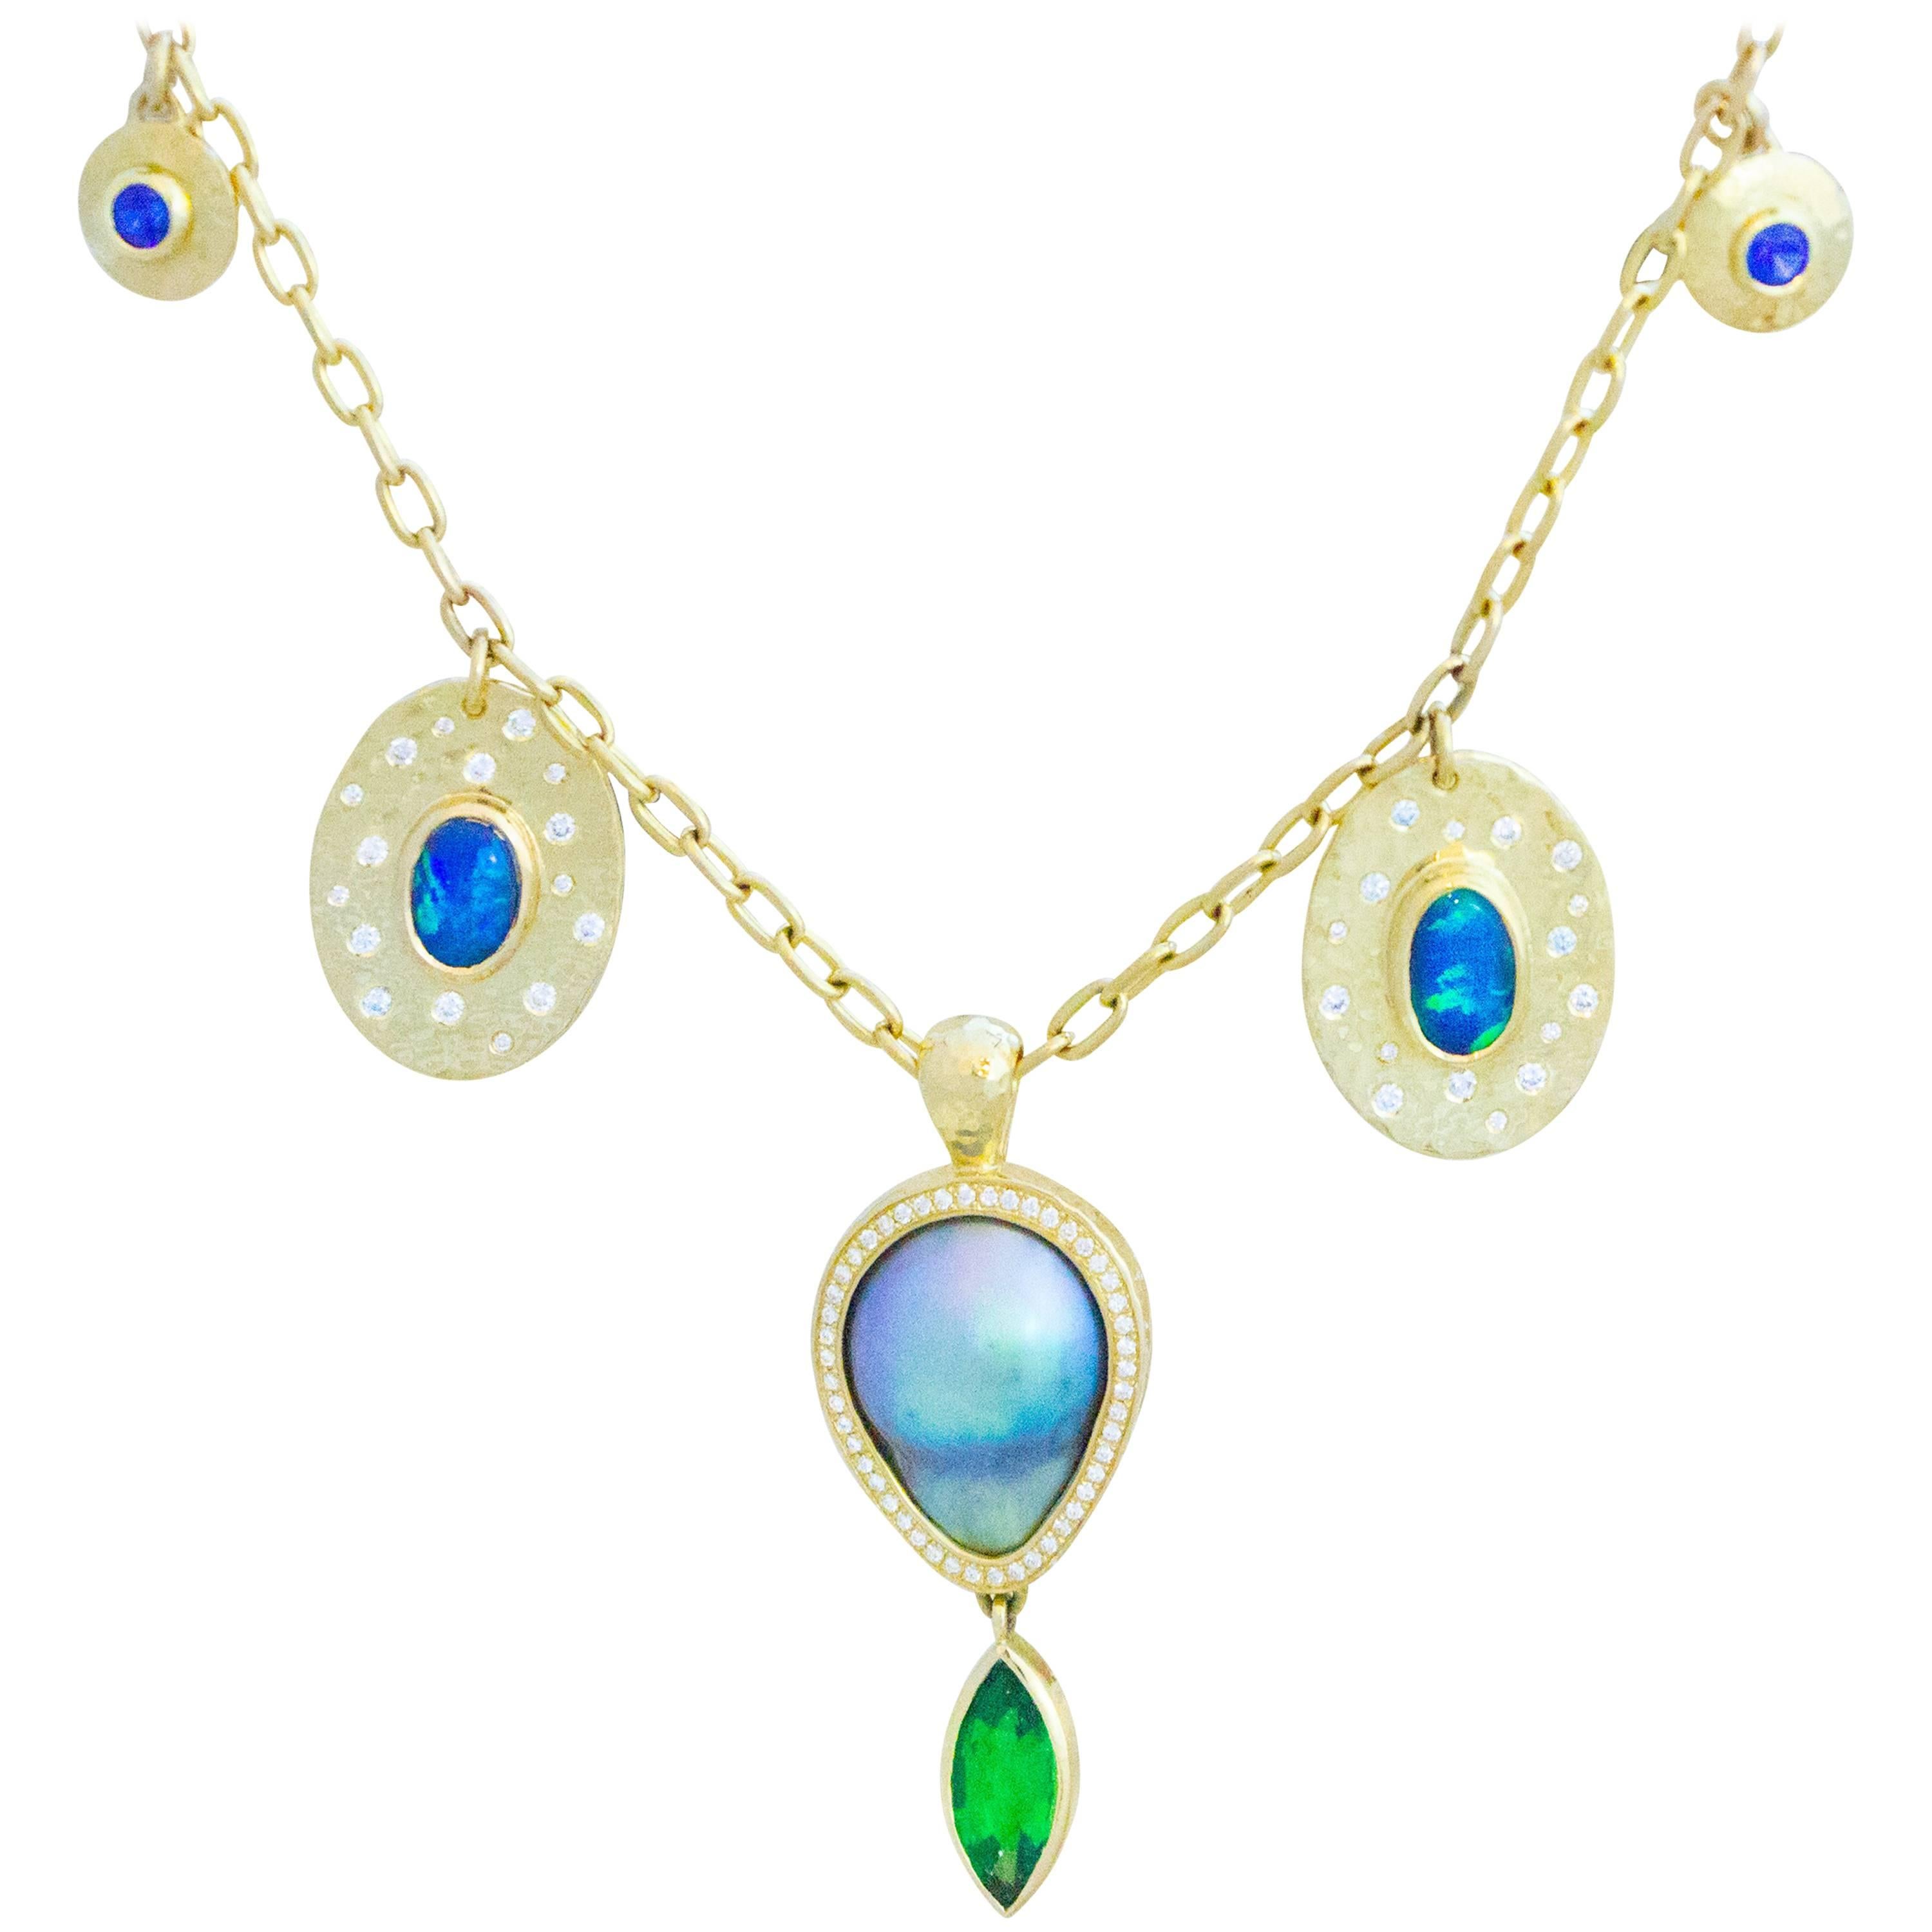 An homage to color and phenomenal gems. This pendant features a 